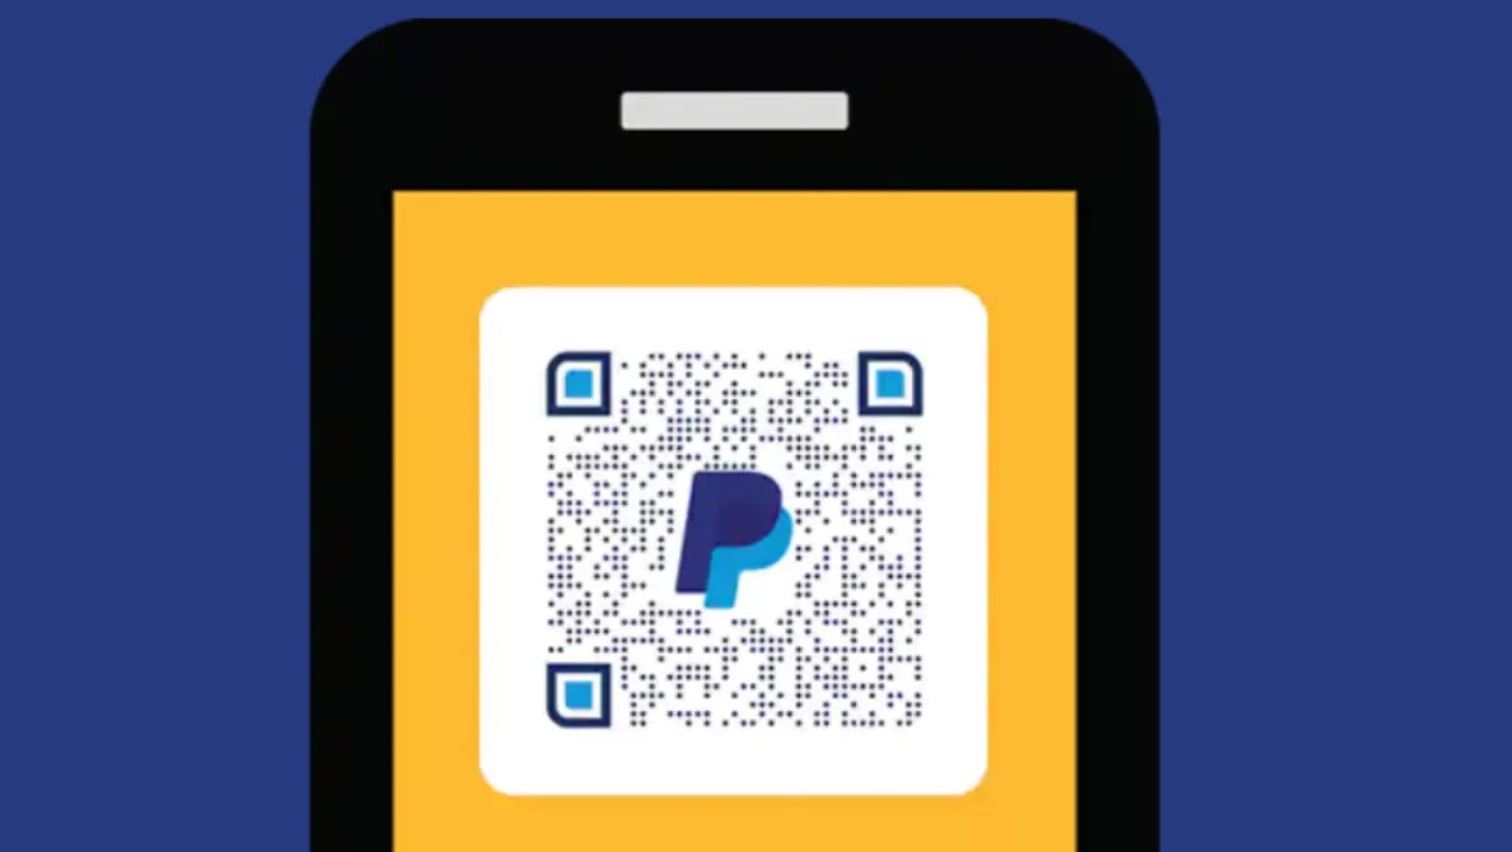 How To Pay By Paypal In Stores Through The QR Code